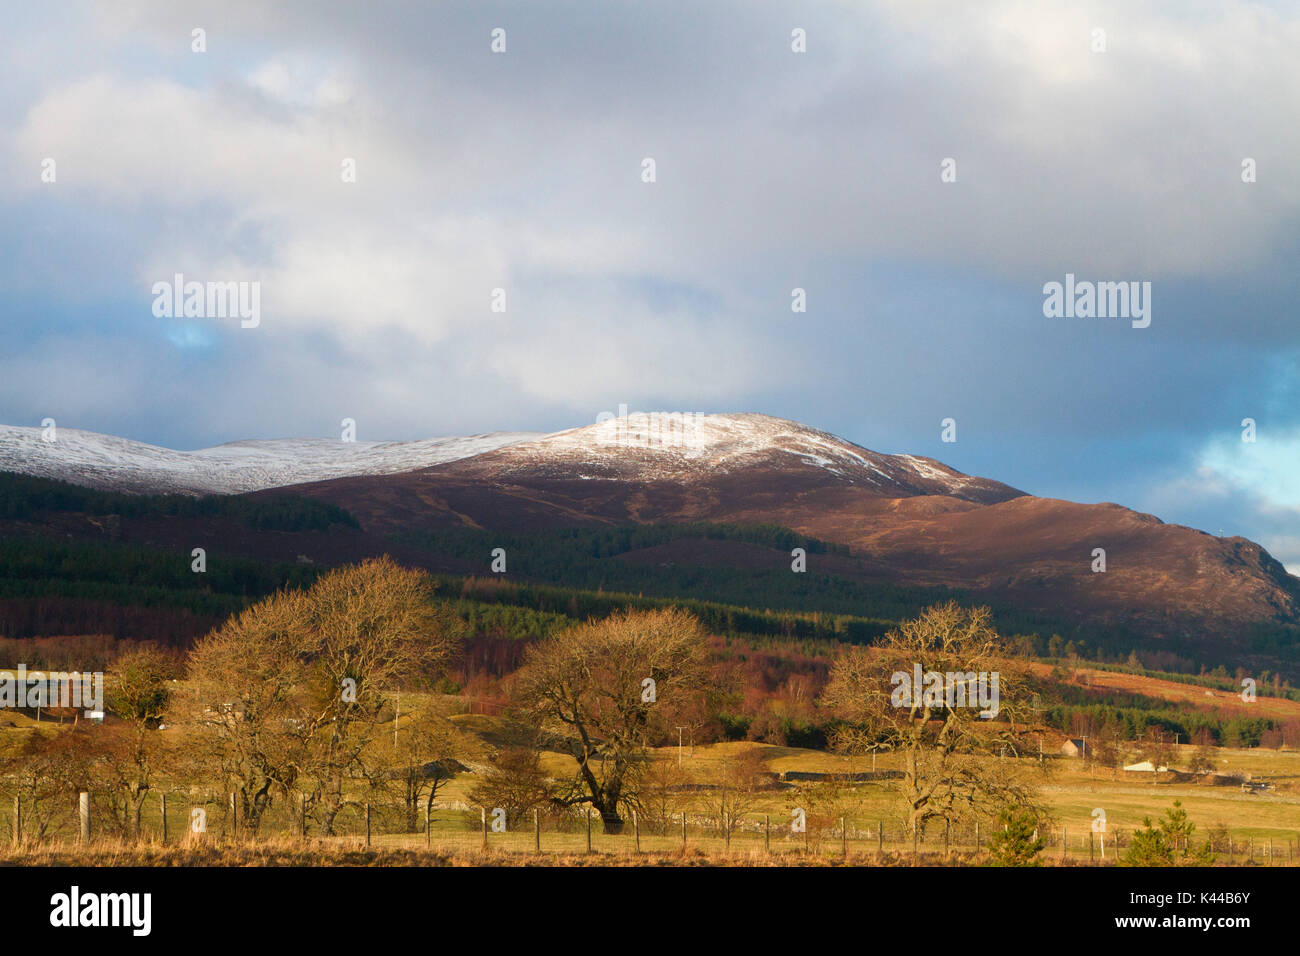 Scotland, Highlands. Driving through Highlands in a winter day from Aberdeen to Glencoe Stock Photo